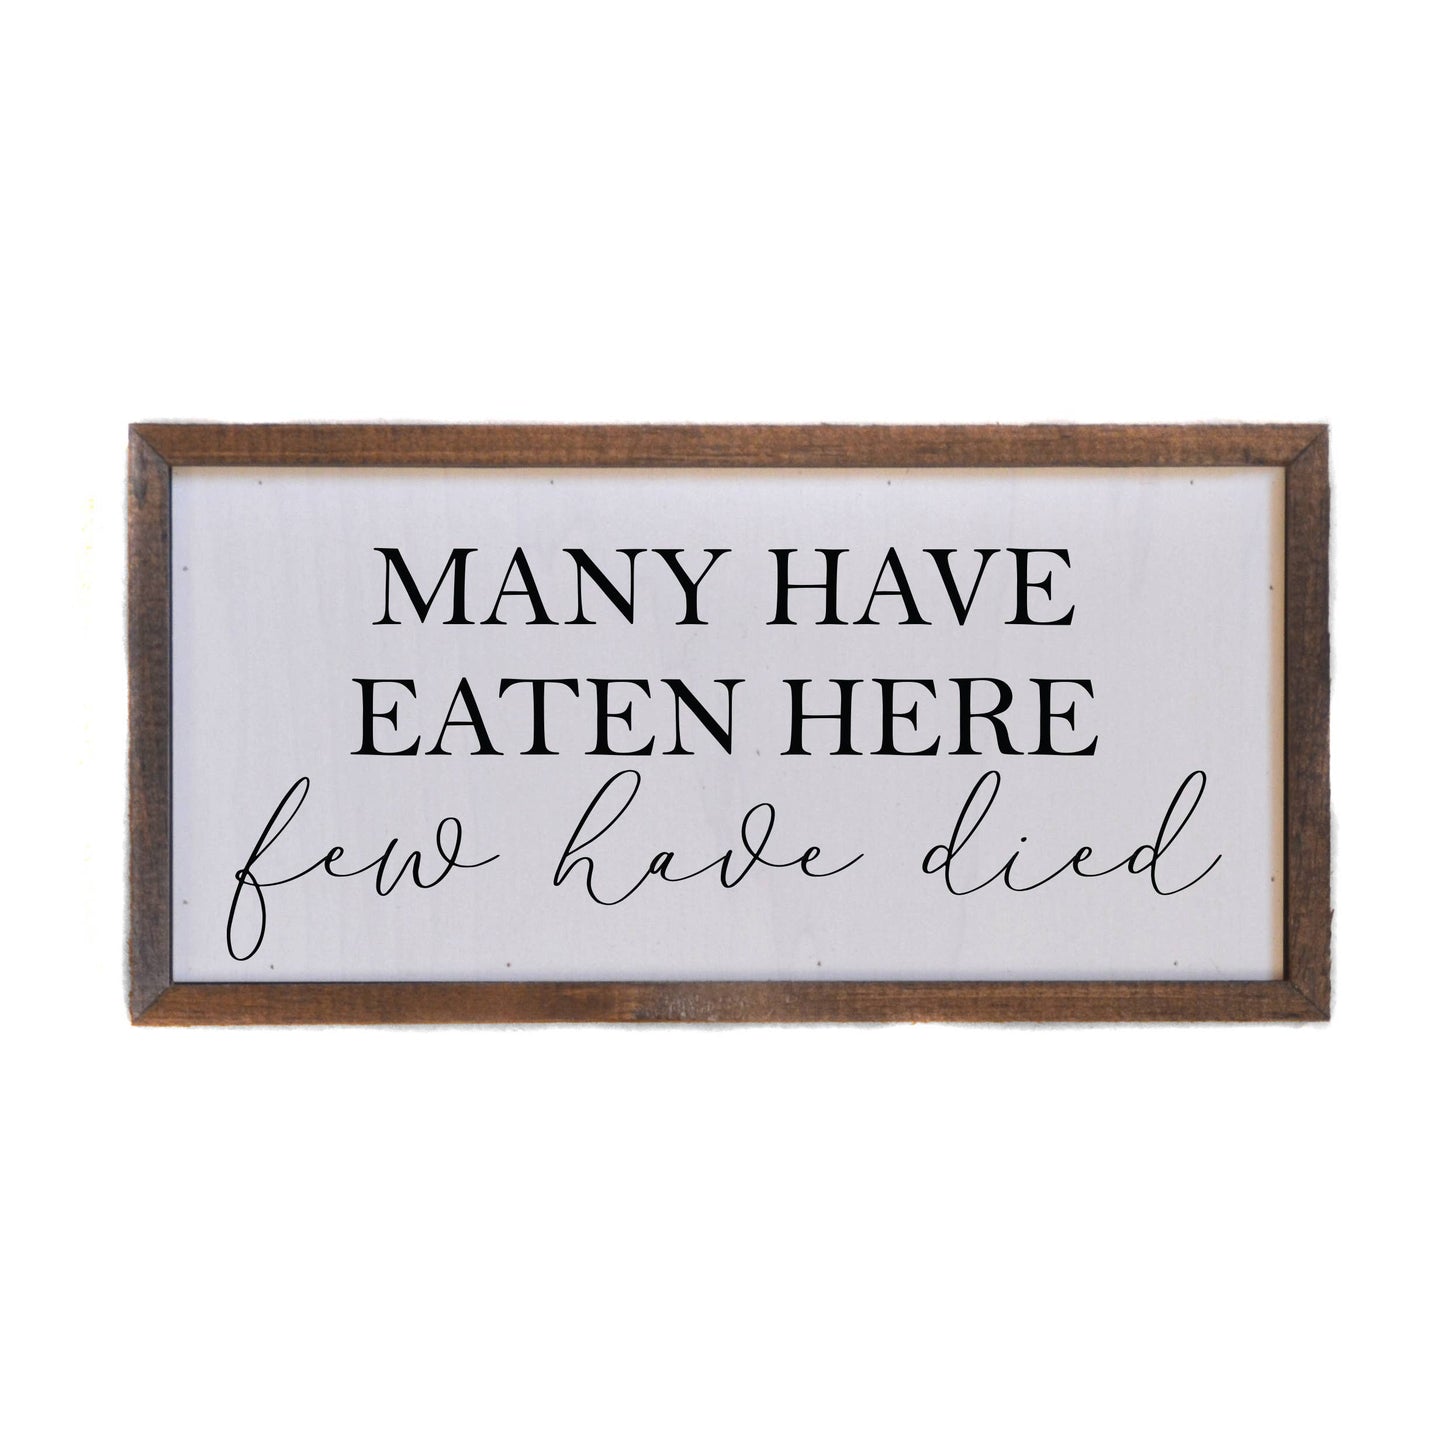 Driftless Studios - 12x6 "Many Have Eaten Here, Few Have Died" Wooden Sign